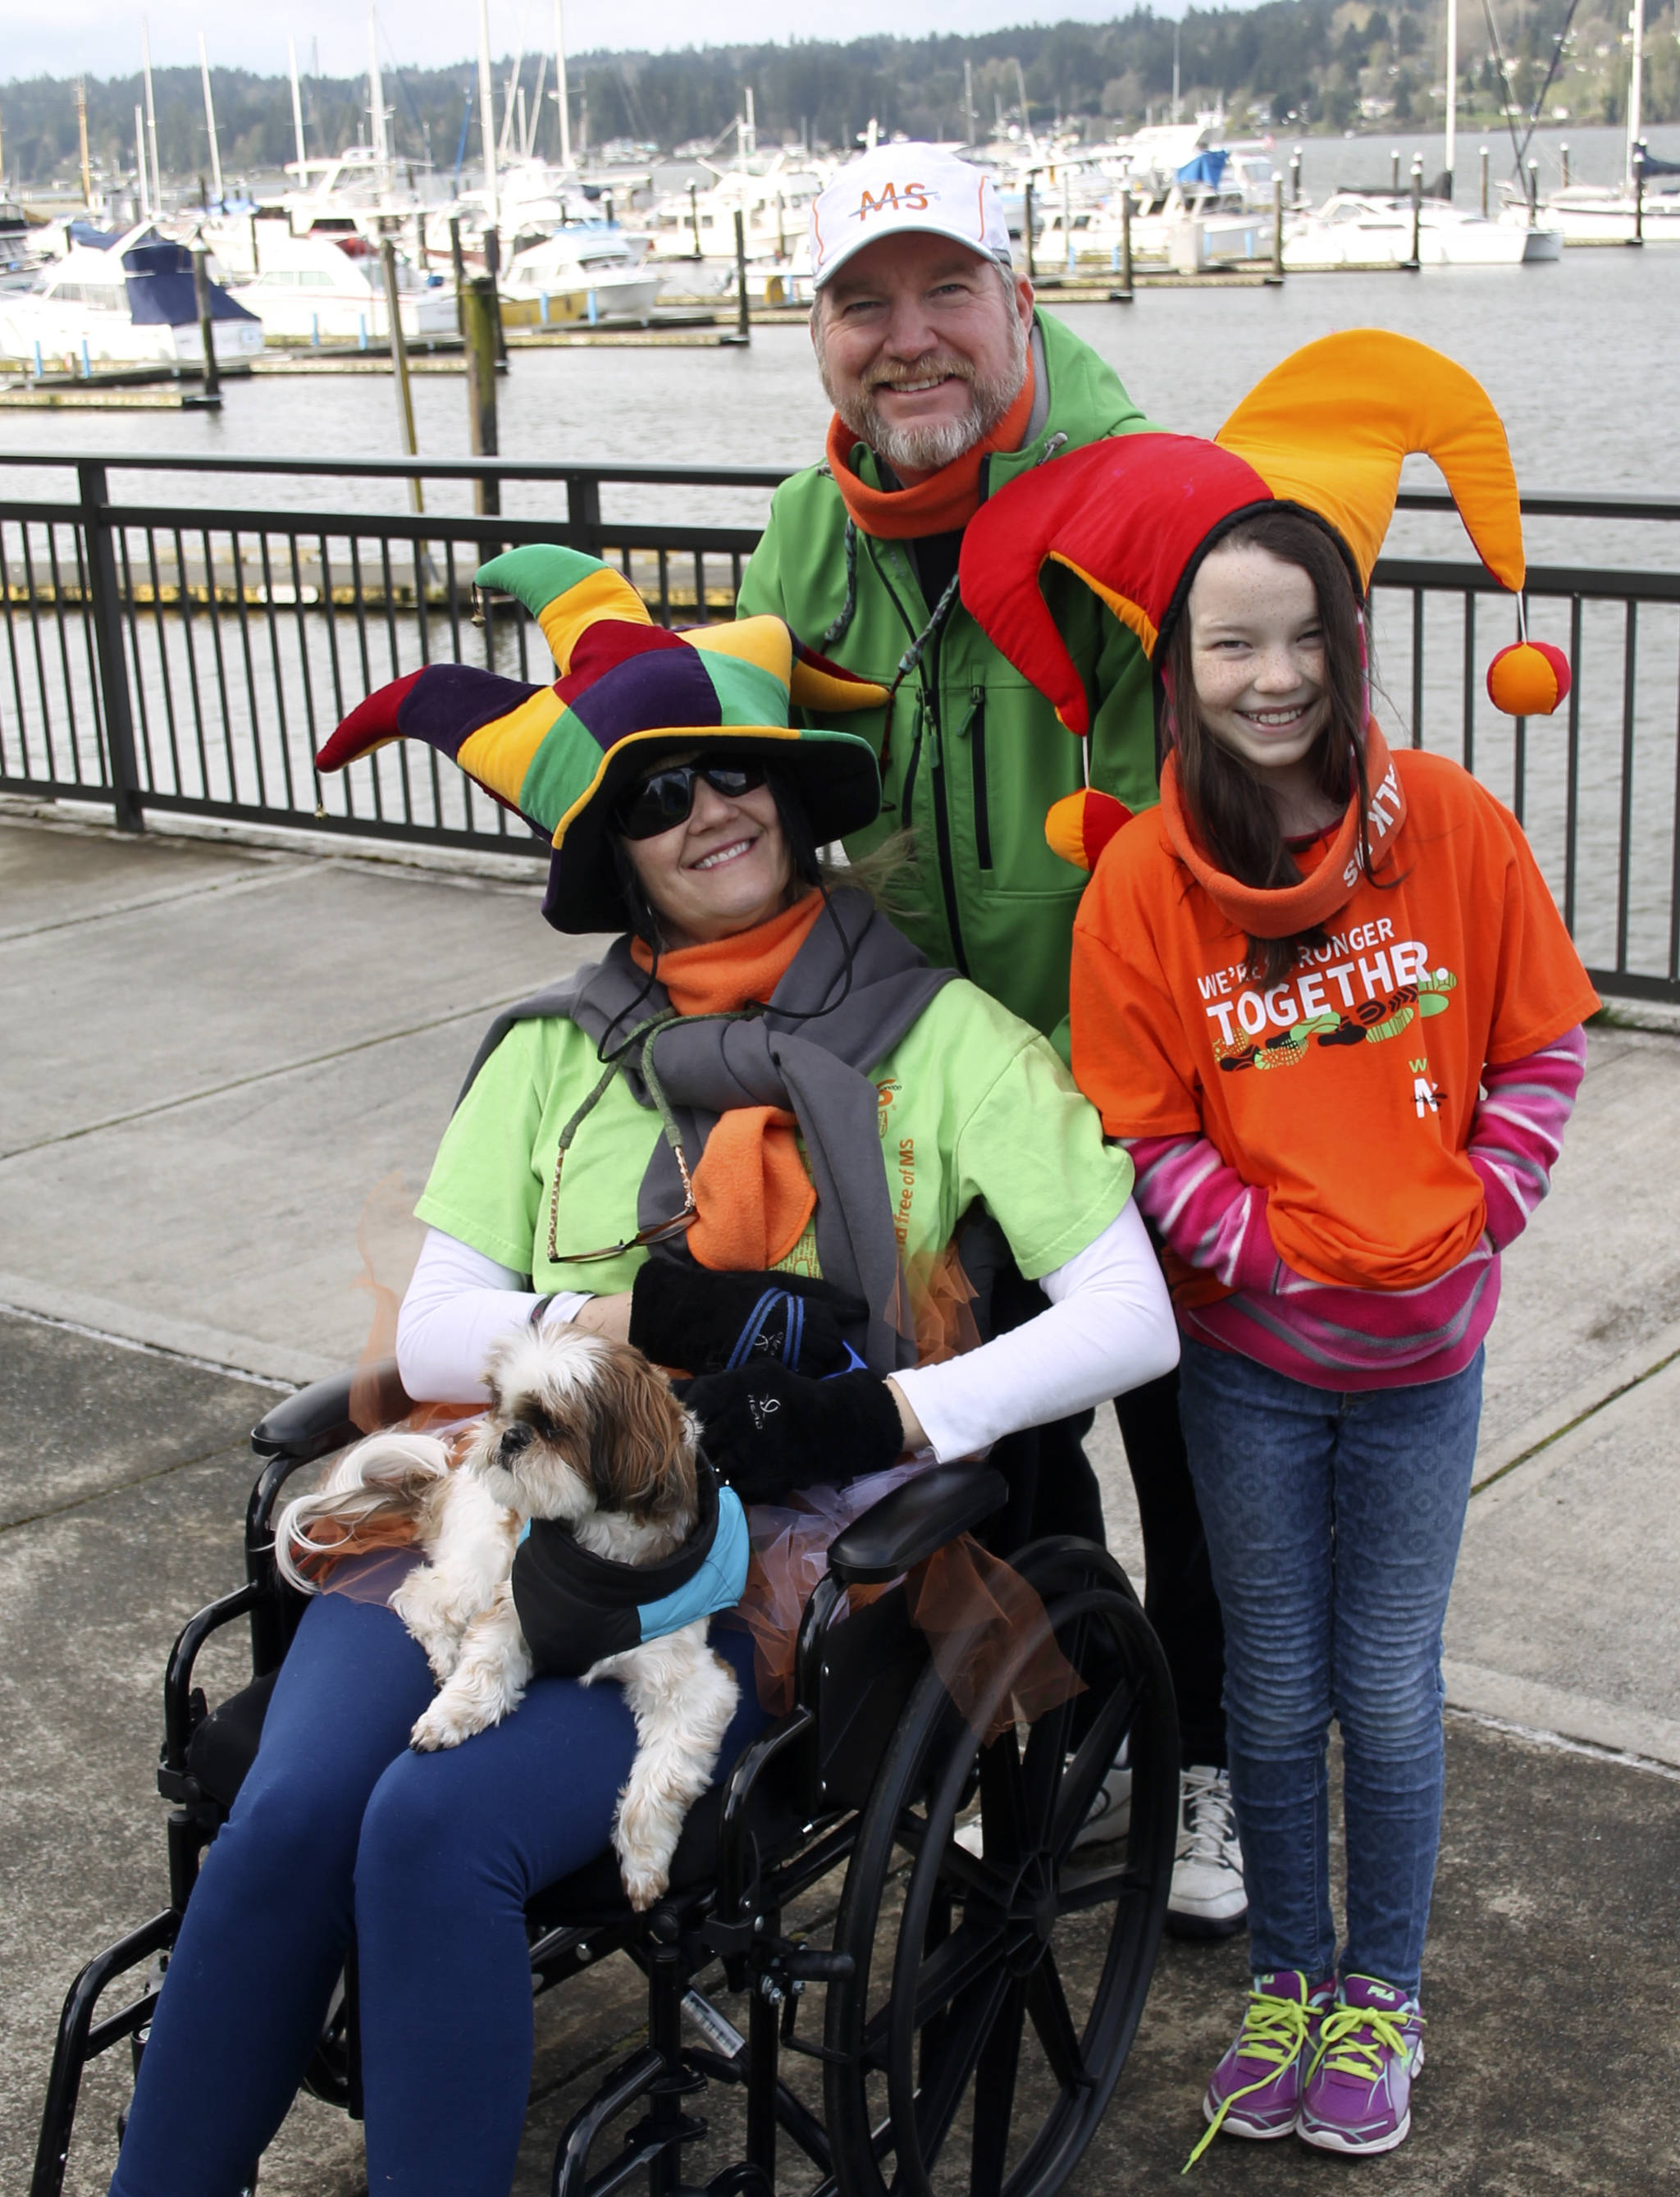 The Plake family wasn’t clowning around about fighting MS, but they kept their sense of humor. Jennifer (left), who was diagnosed with MS five years ago, brought along her husband John, daughter Jennifer and Indy the dog. (Terryl Asla/Kitsap News Group)